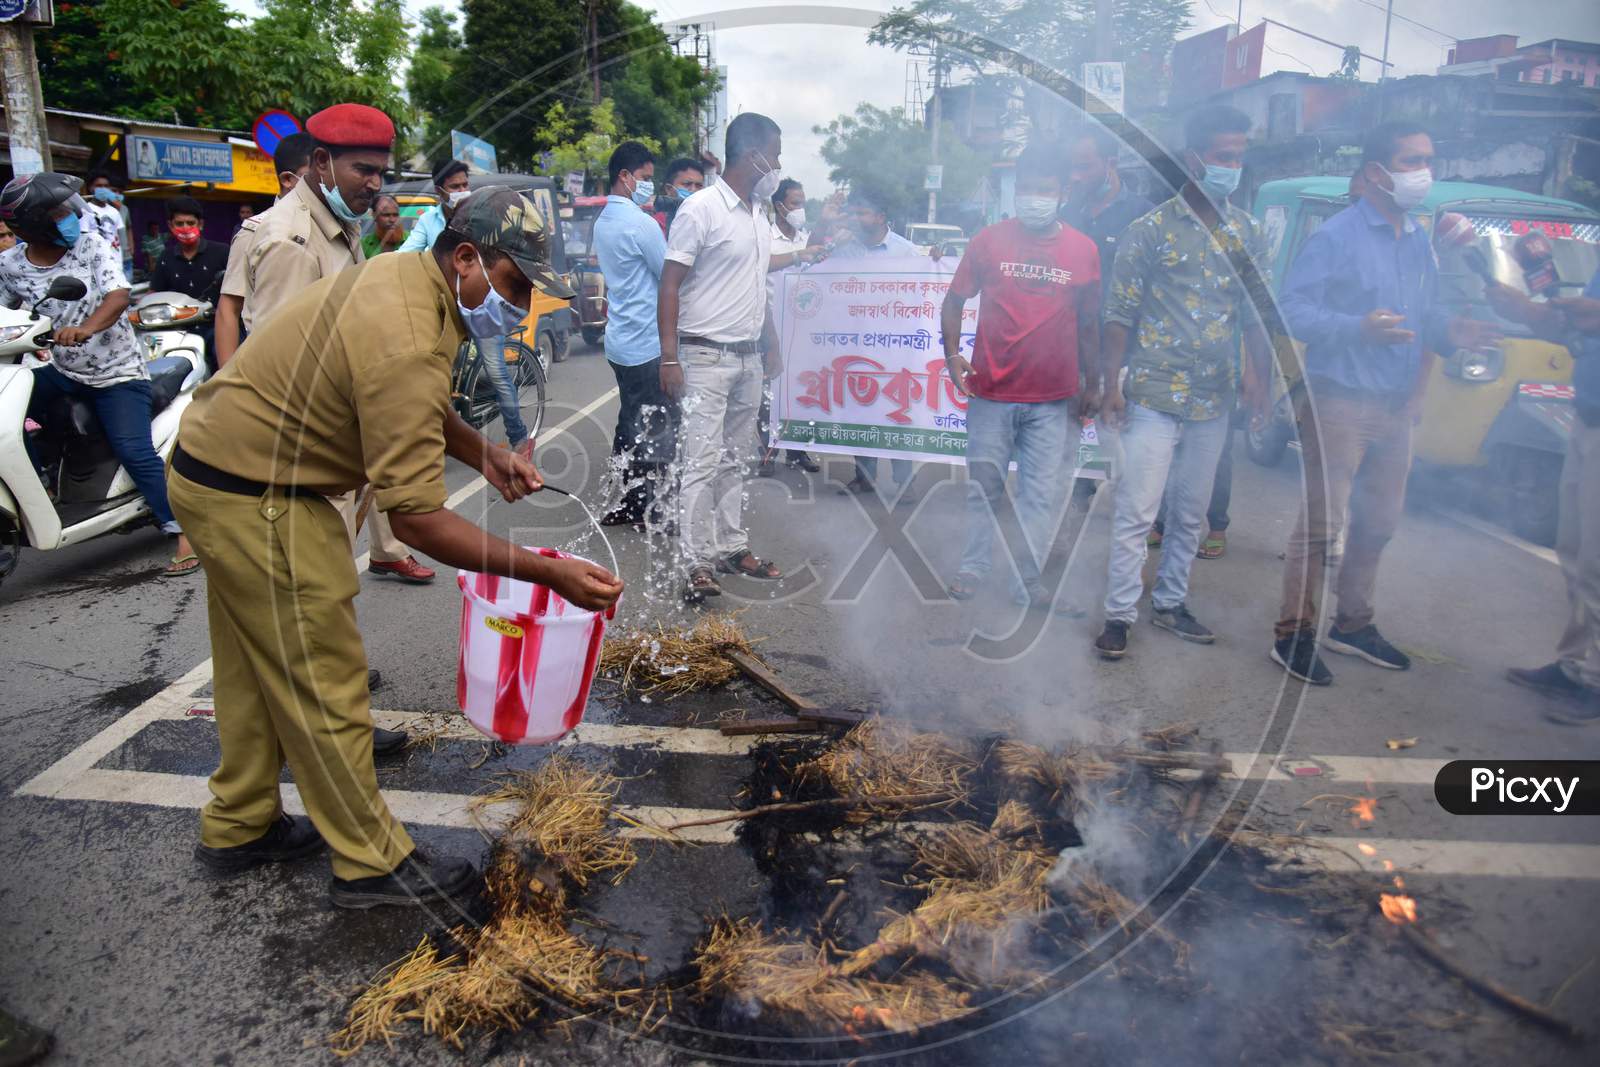 A police personnel douses an effigy set ablaze by the Asom Jatiyatabadi Yuba Chatra Parishad (AJYCP) activists during a protest against recent farm bills in Nagaon District of Assam on Sep 23,2020.